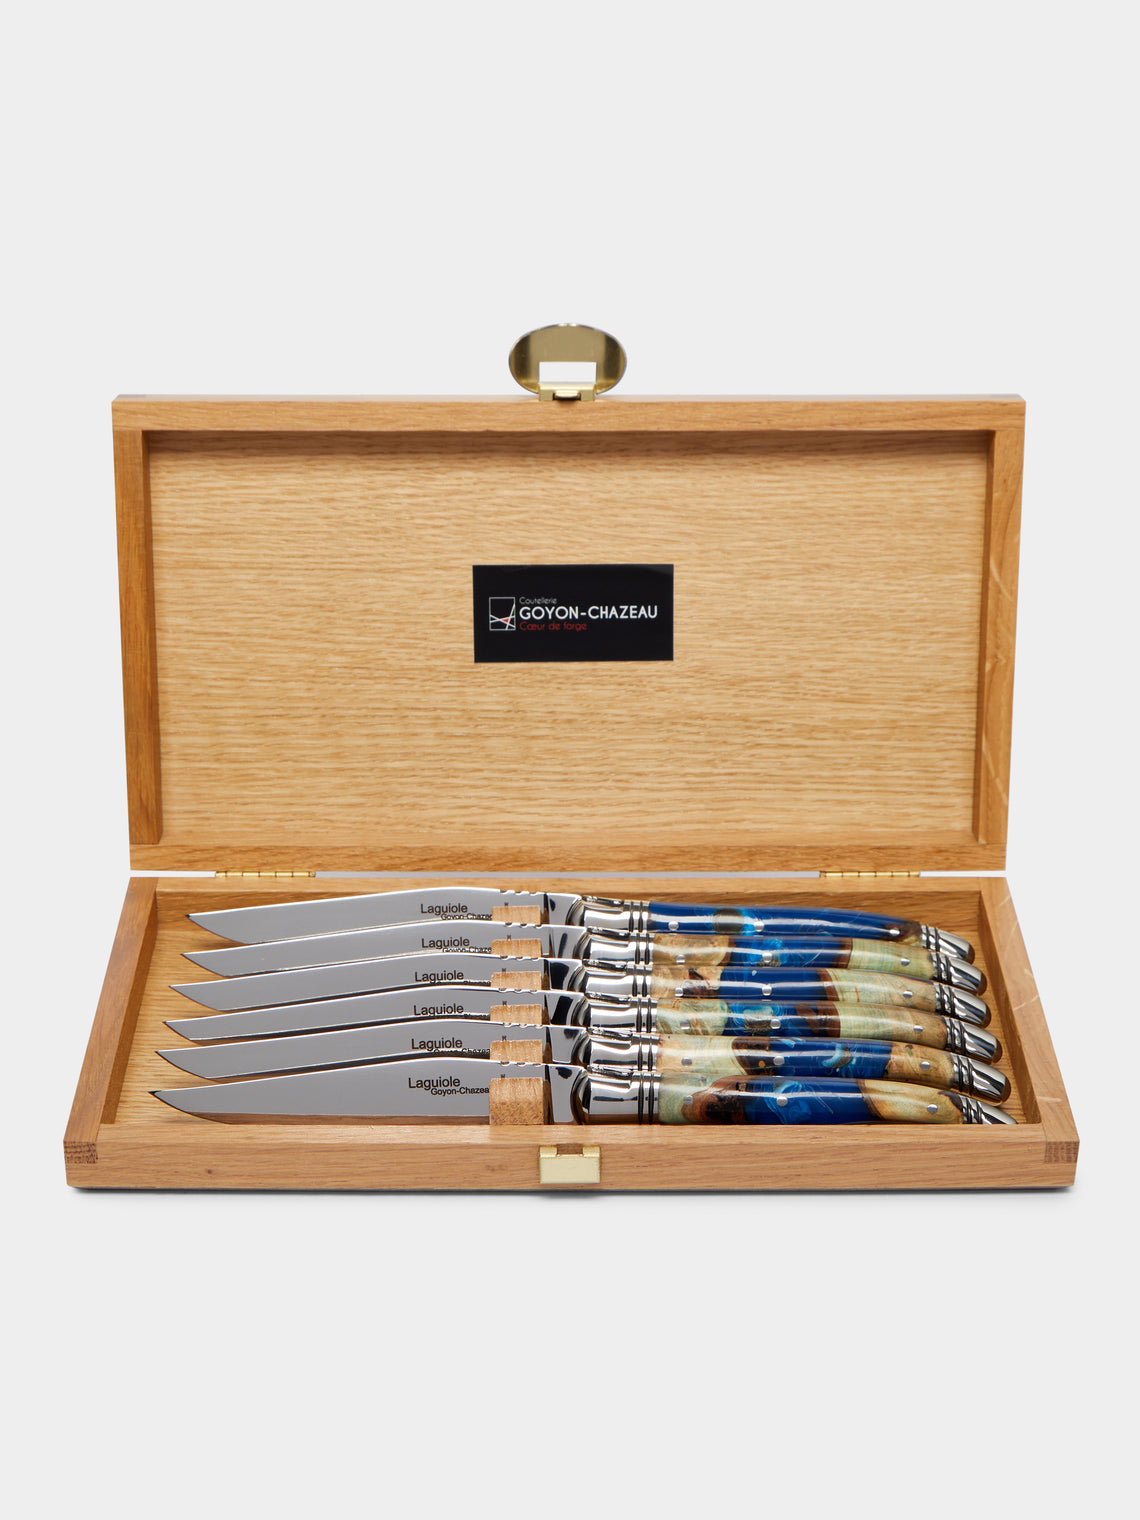 Goyon-Chazeau - Laguiole Pressed Flowers Resin Table Knives (Set of 6) -  - ABASK